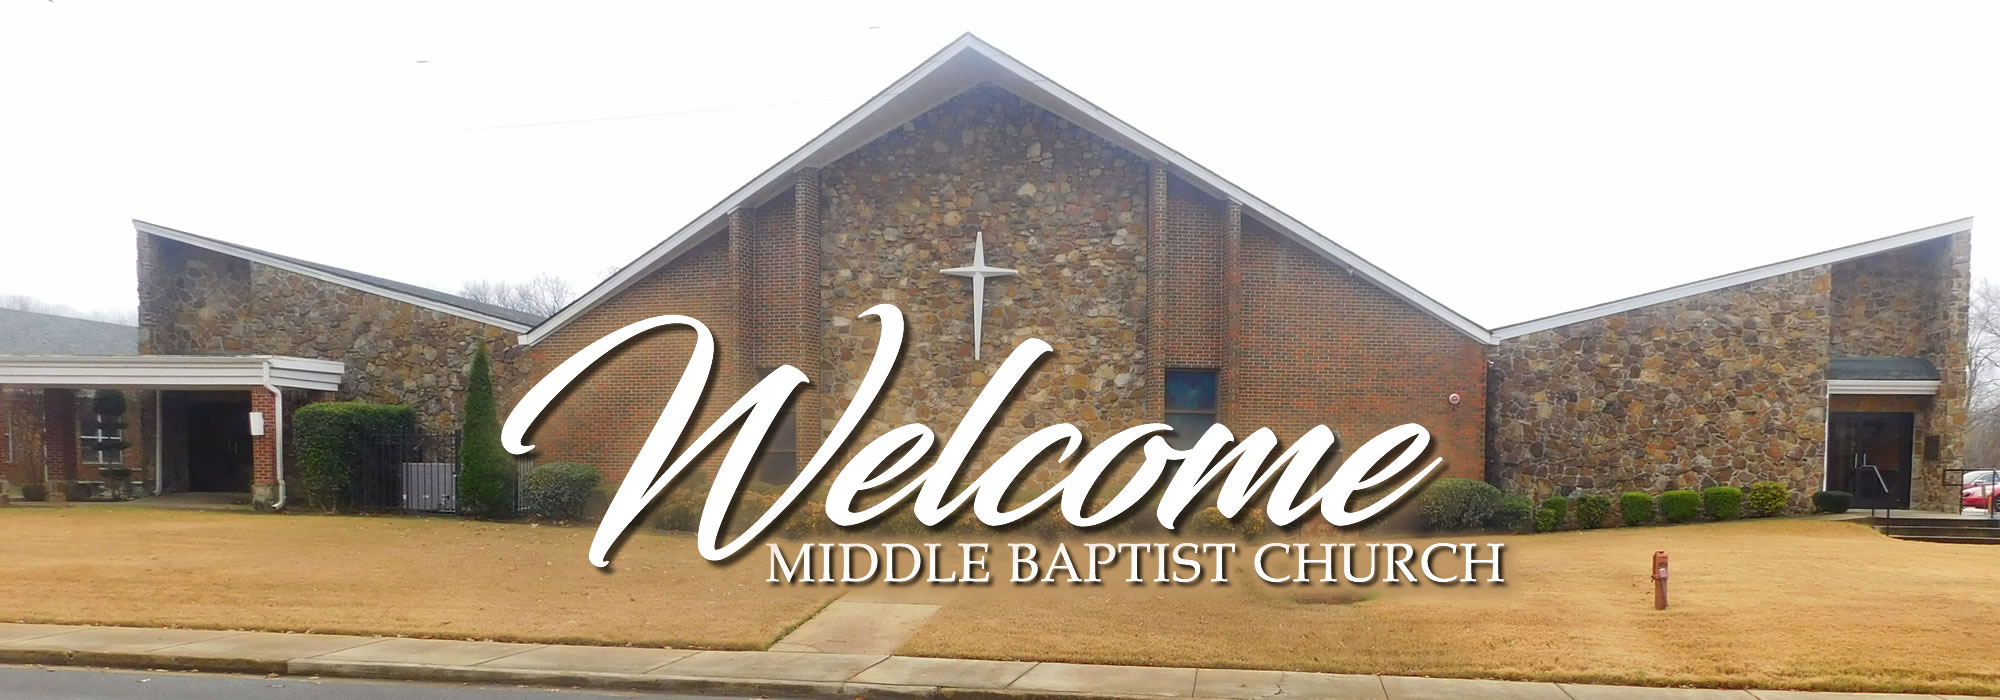 Welcome to Middle Baptist Church